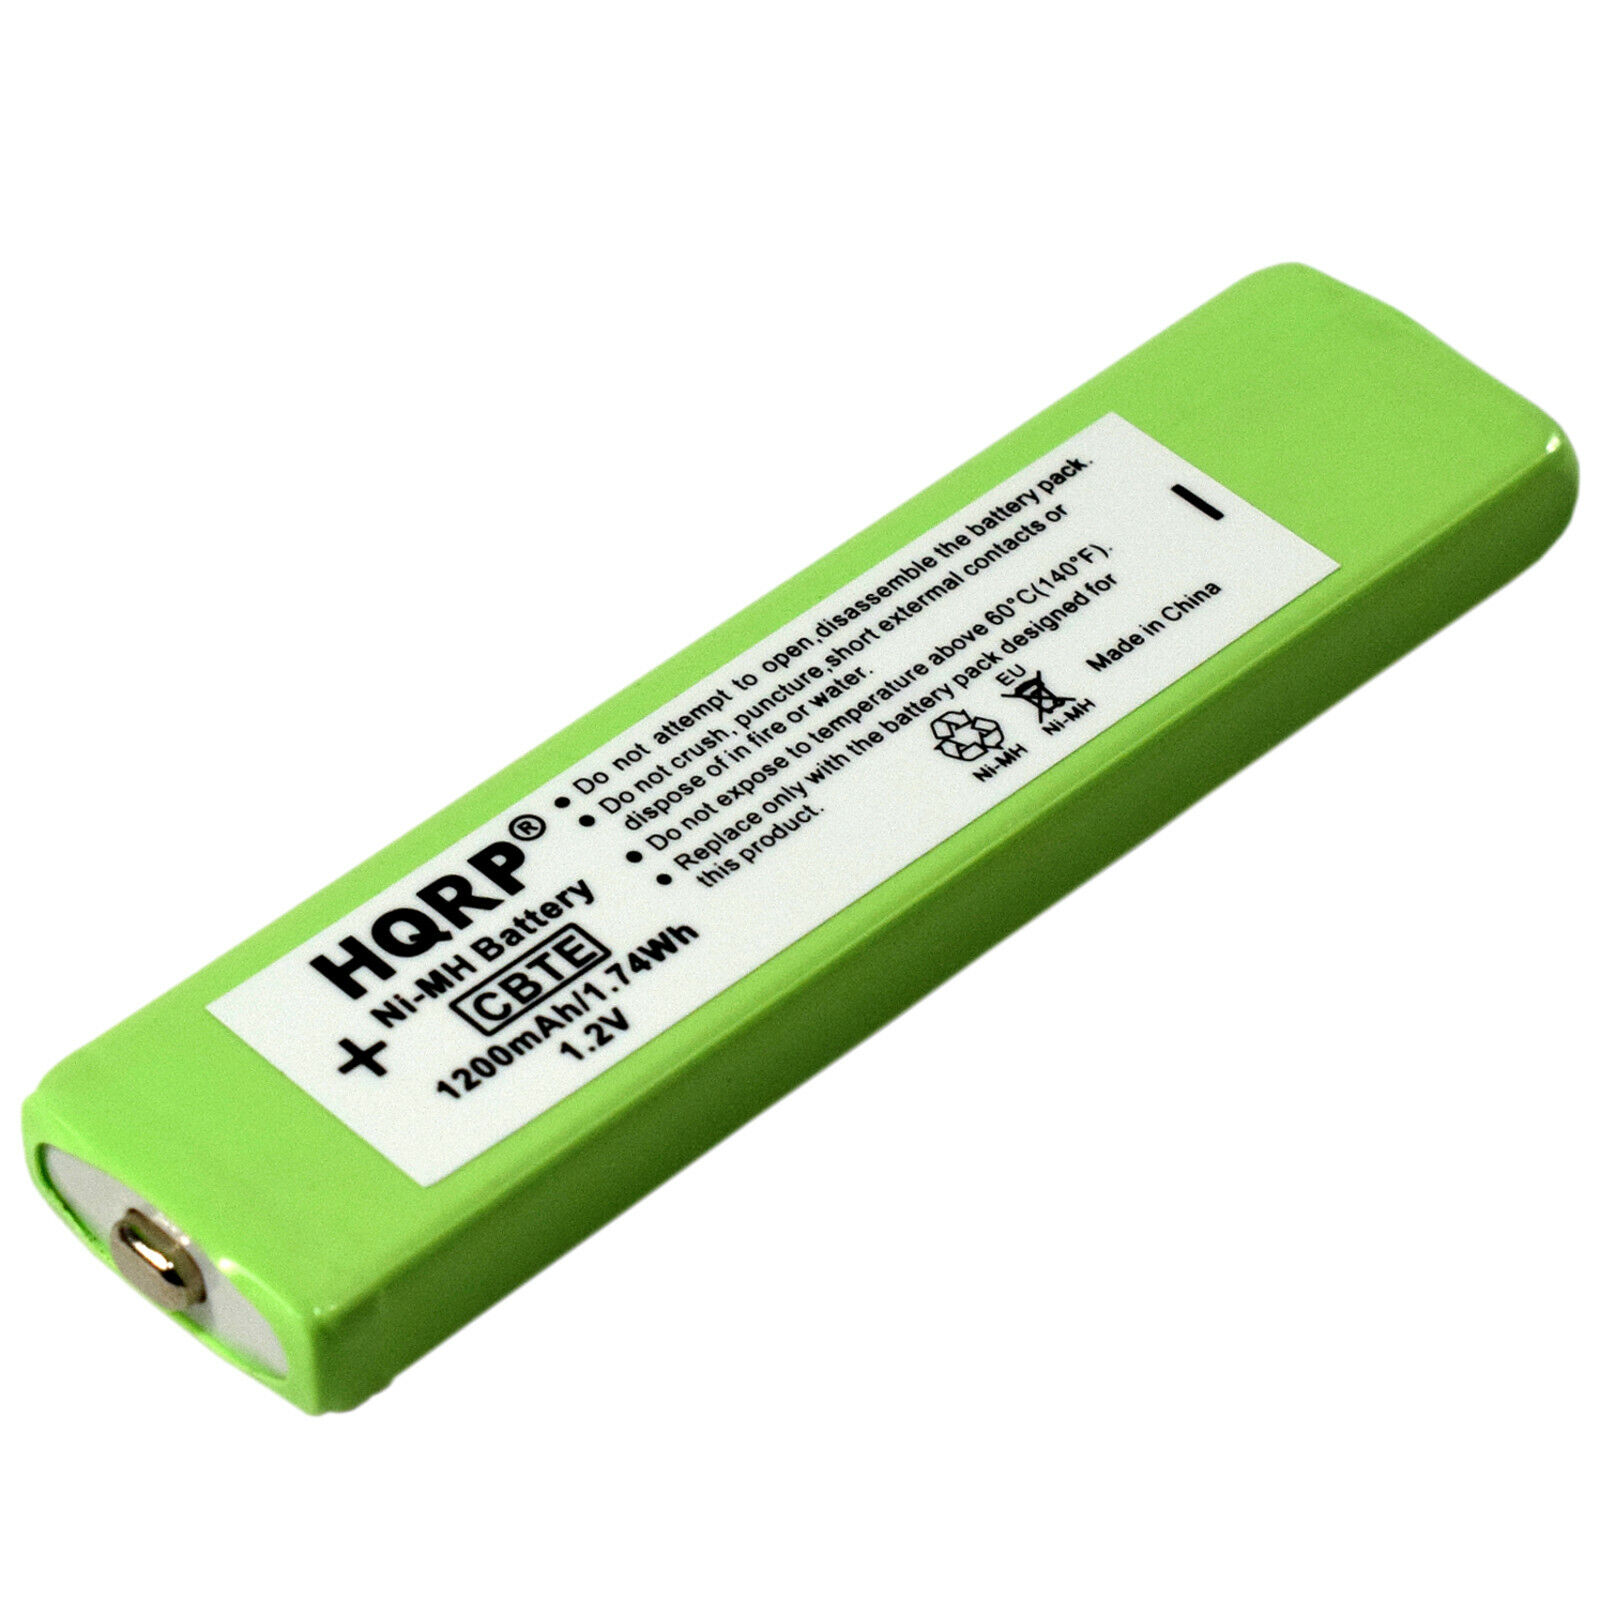 HQRP Battery New color In stock for Sony NH-14WM MP3 MZ-EP11 R90 MZ-M10